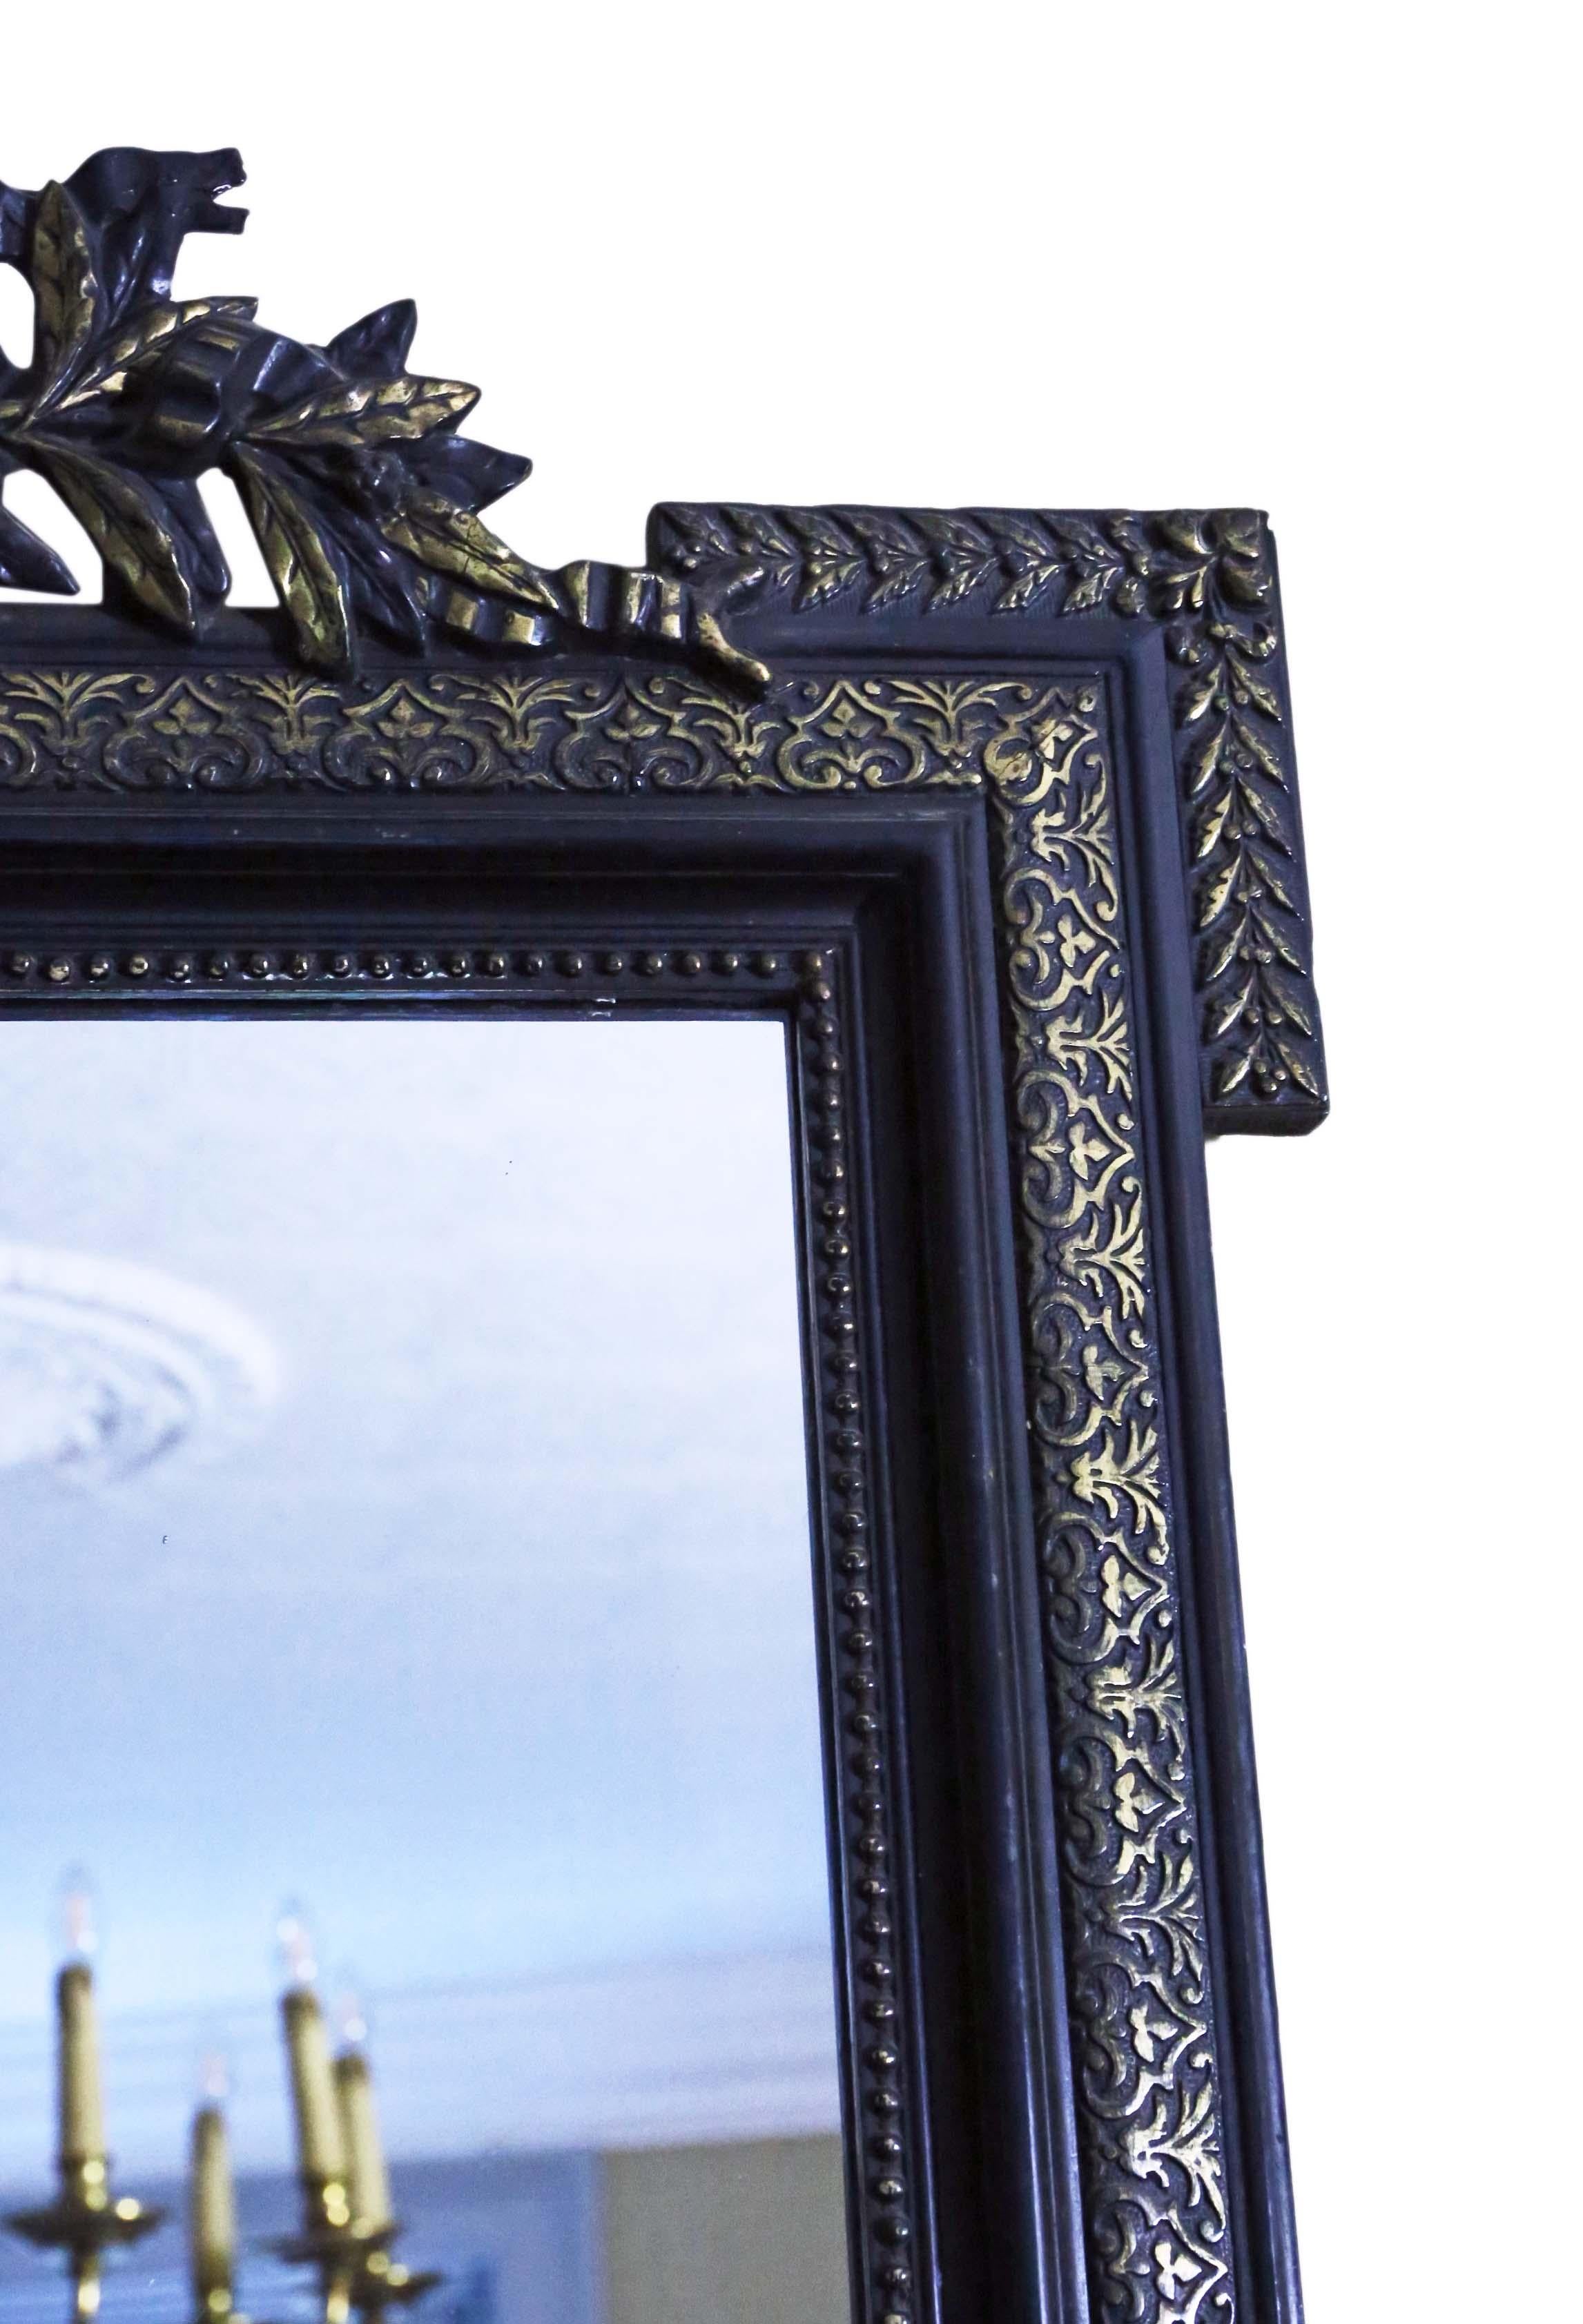 Antique 19th Century Large Ebonised Gilt Wall Mirror Overmantle In Good Condition For Sale In Wisbech, Cambridgeshire